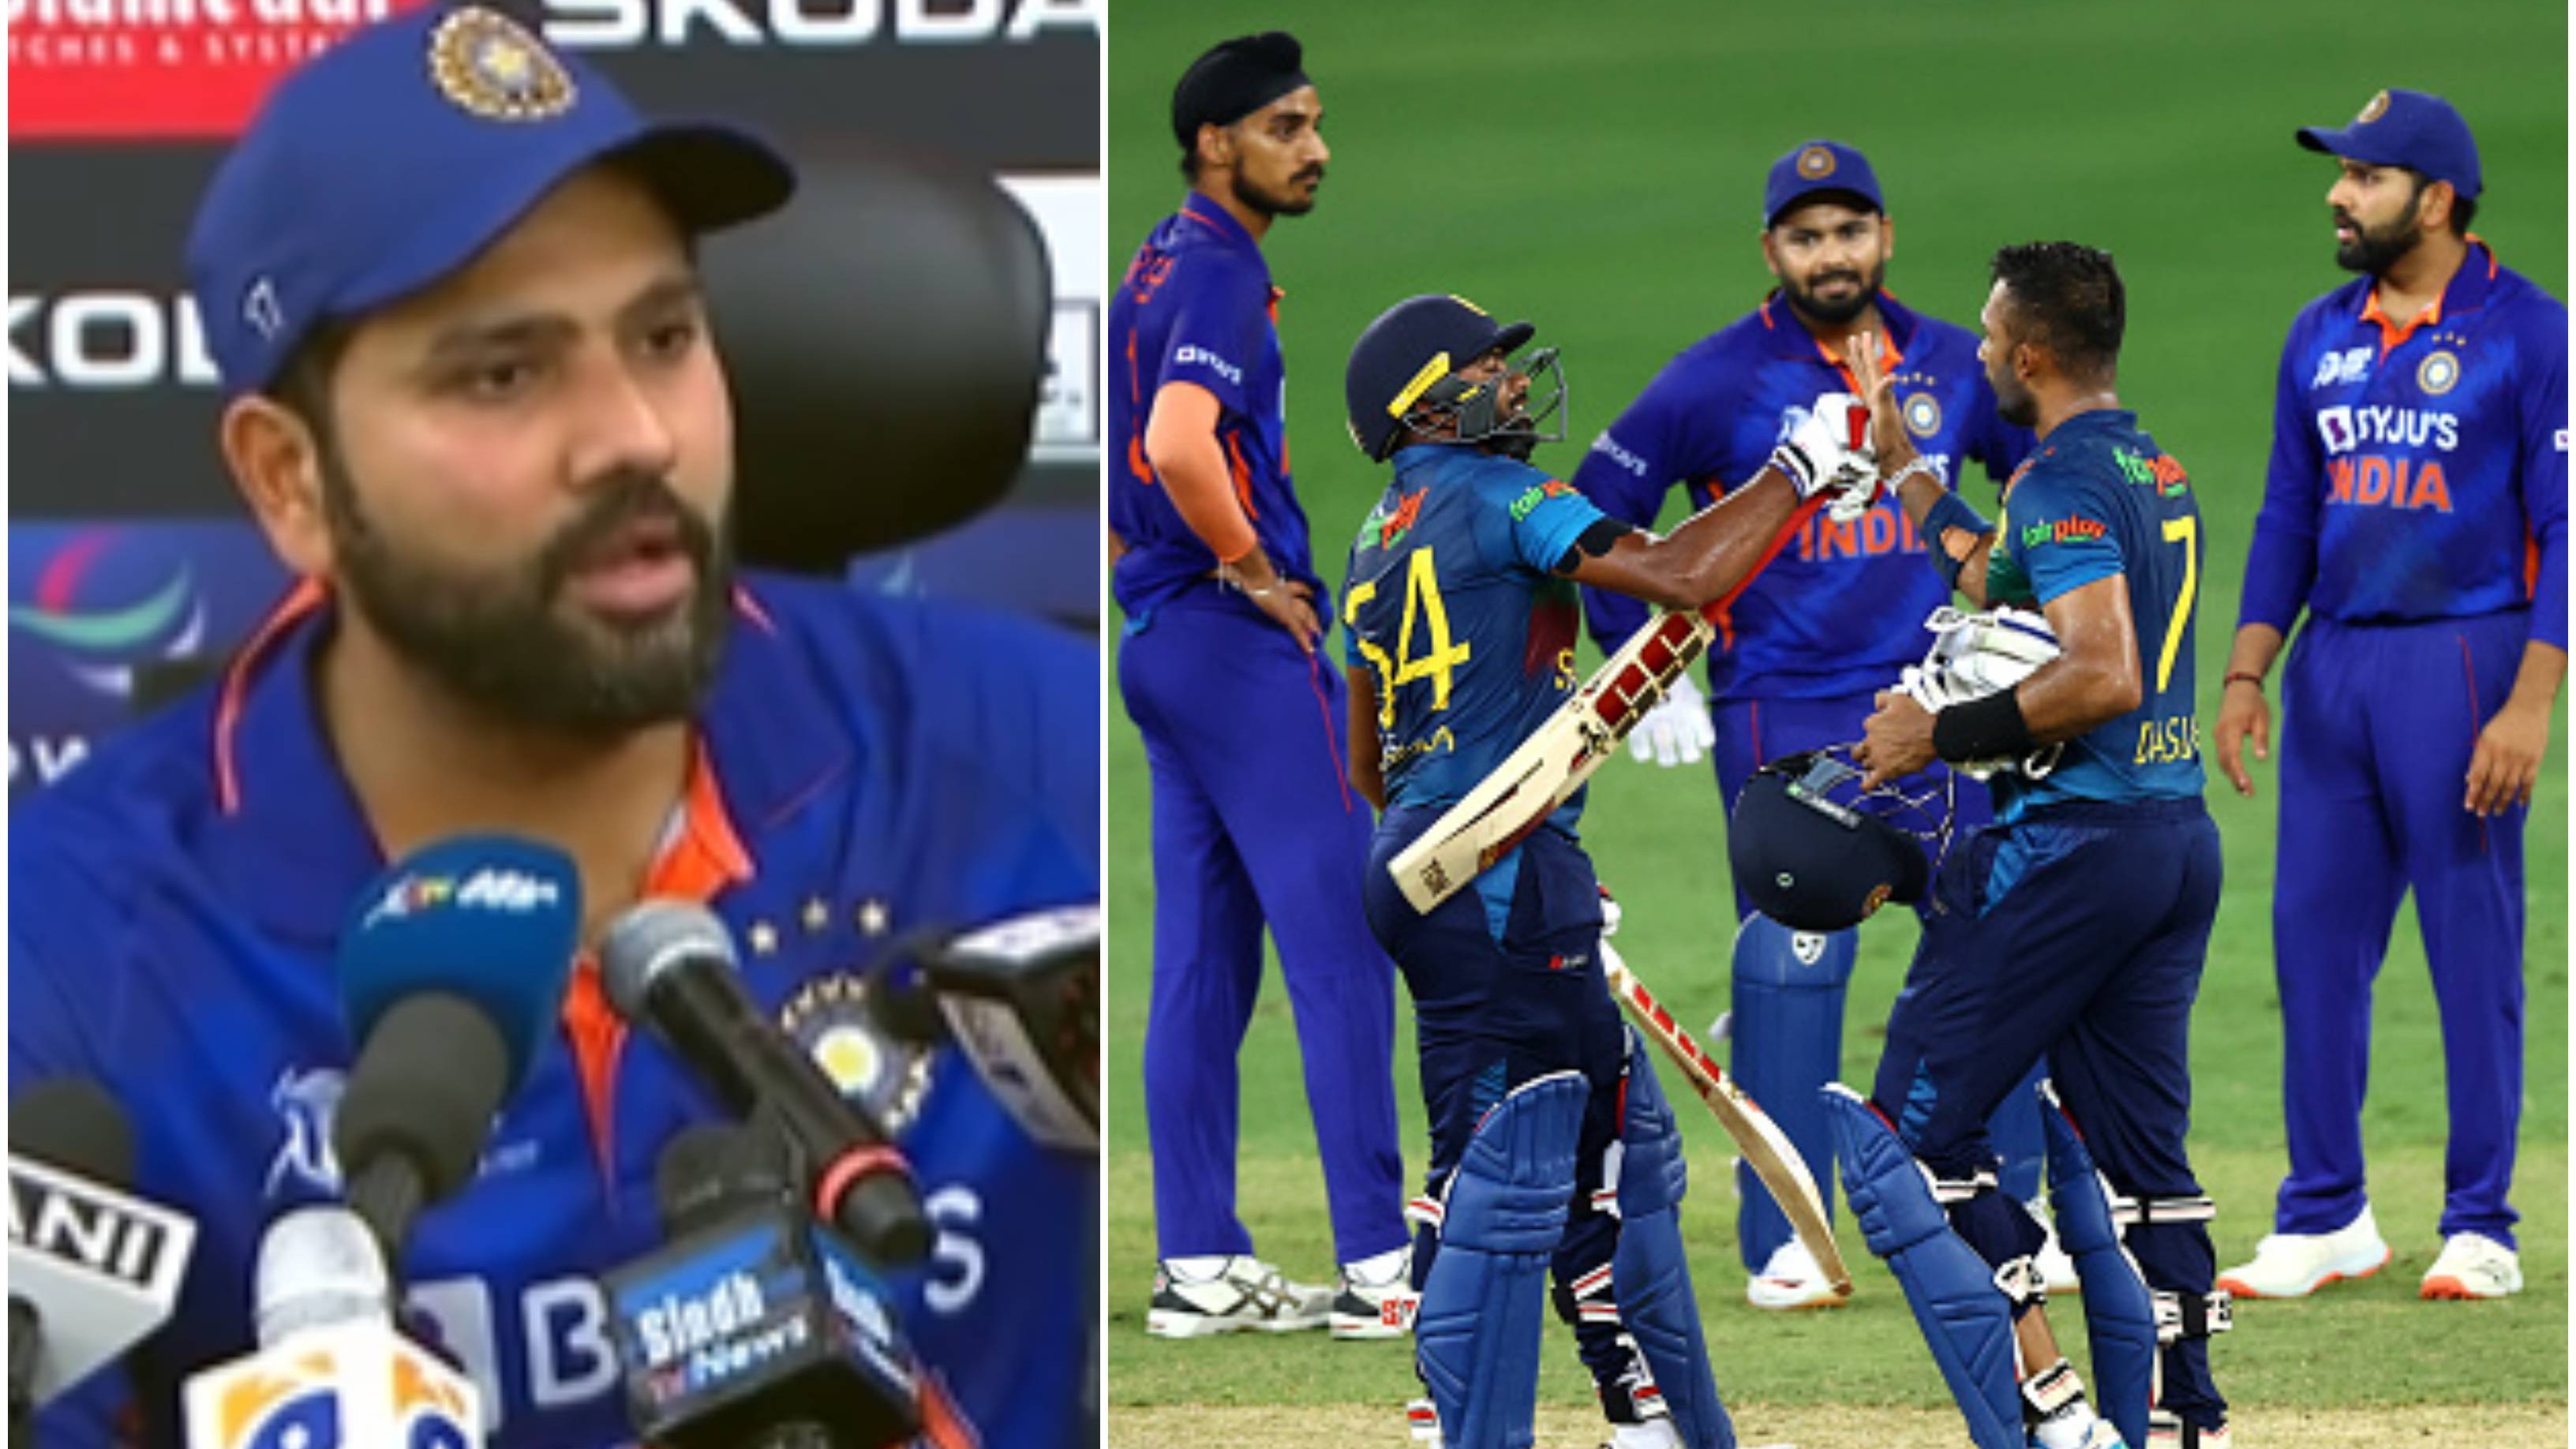 Asia Cup 2022: WATCH - “Don't think we are lagging,” Rohit Sharma on India’s poor display in multi-nation tournaments